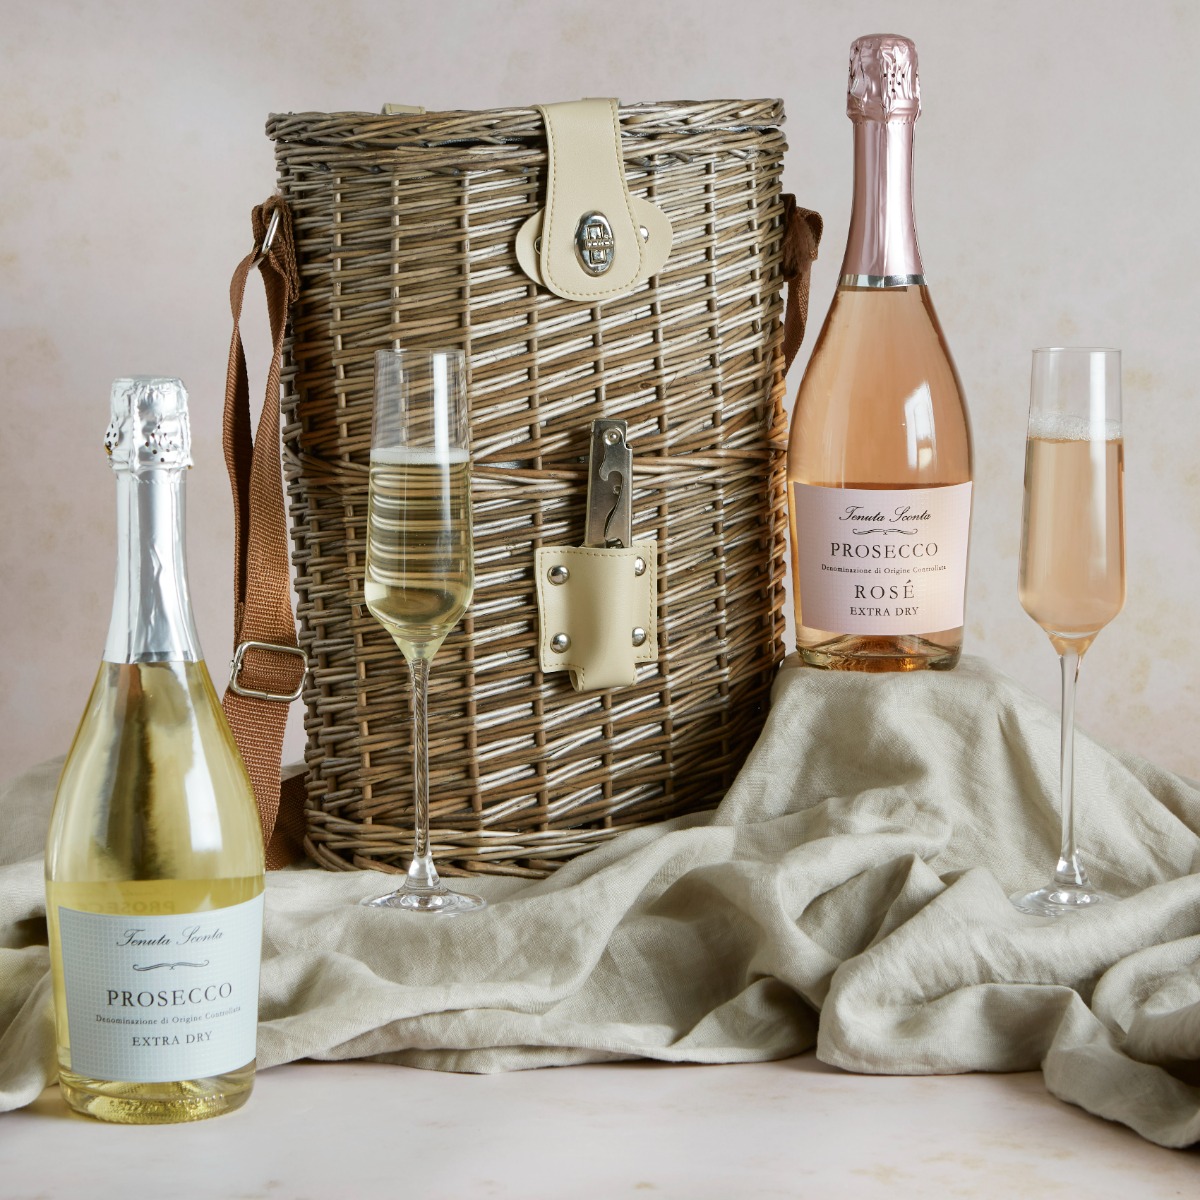 Prosecco Duo & Wicker Chiller Carrier Summer Picnic Hampers UK Hampers.com